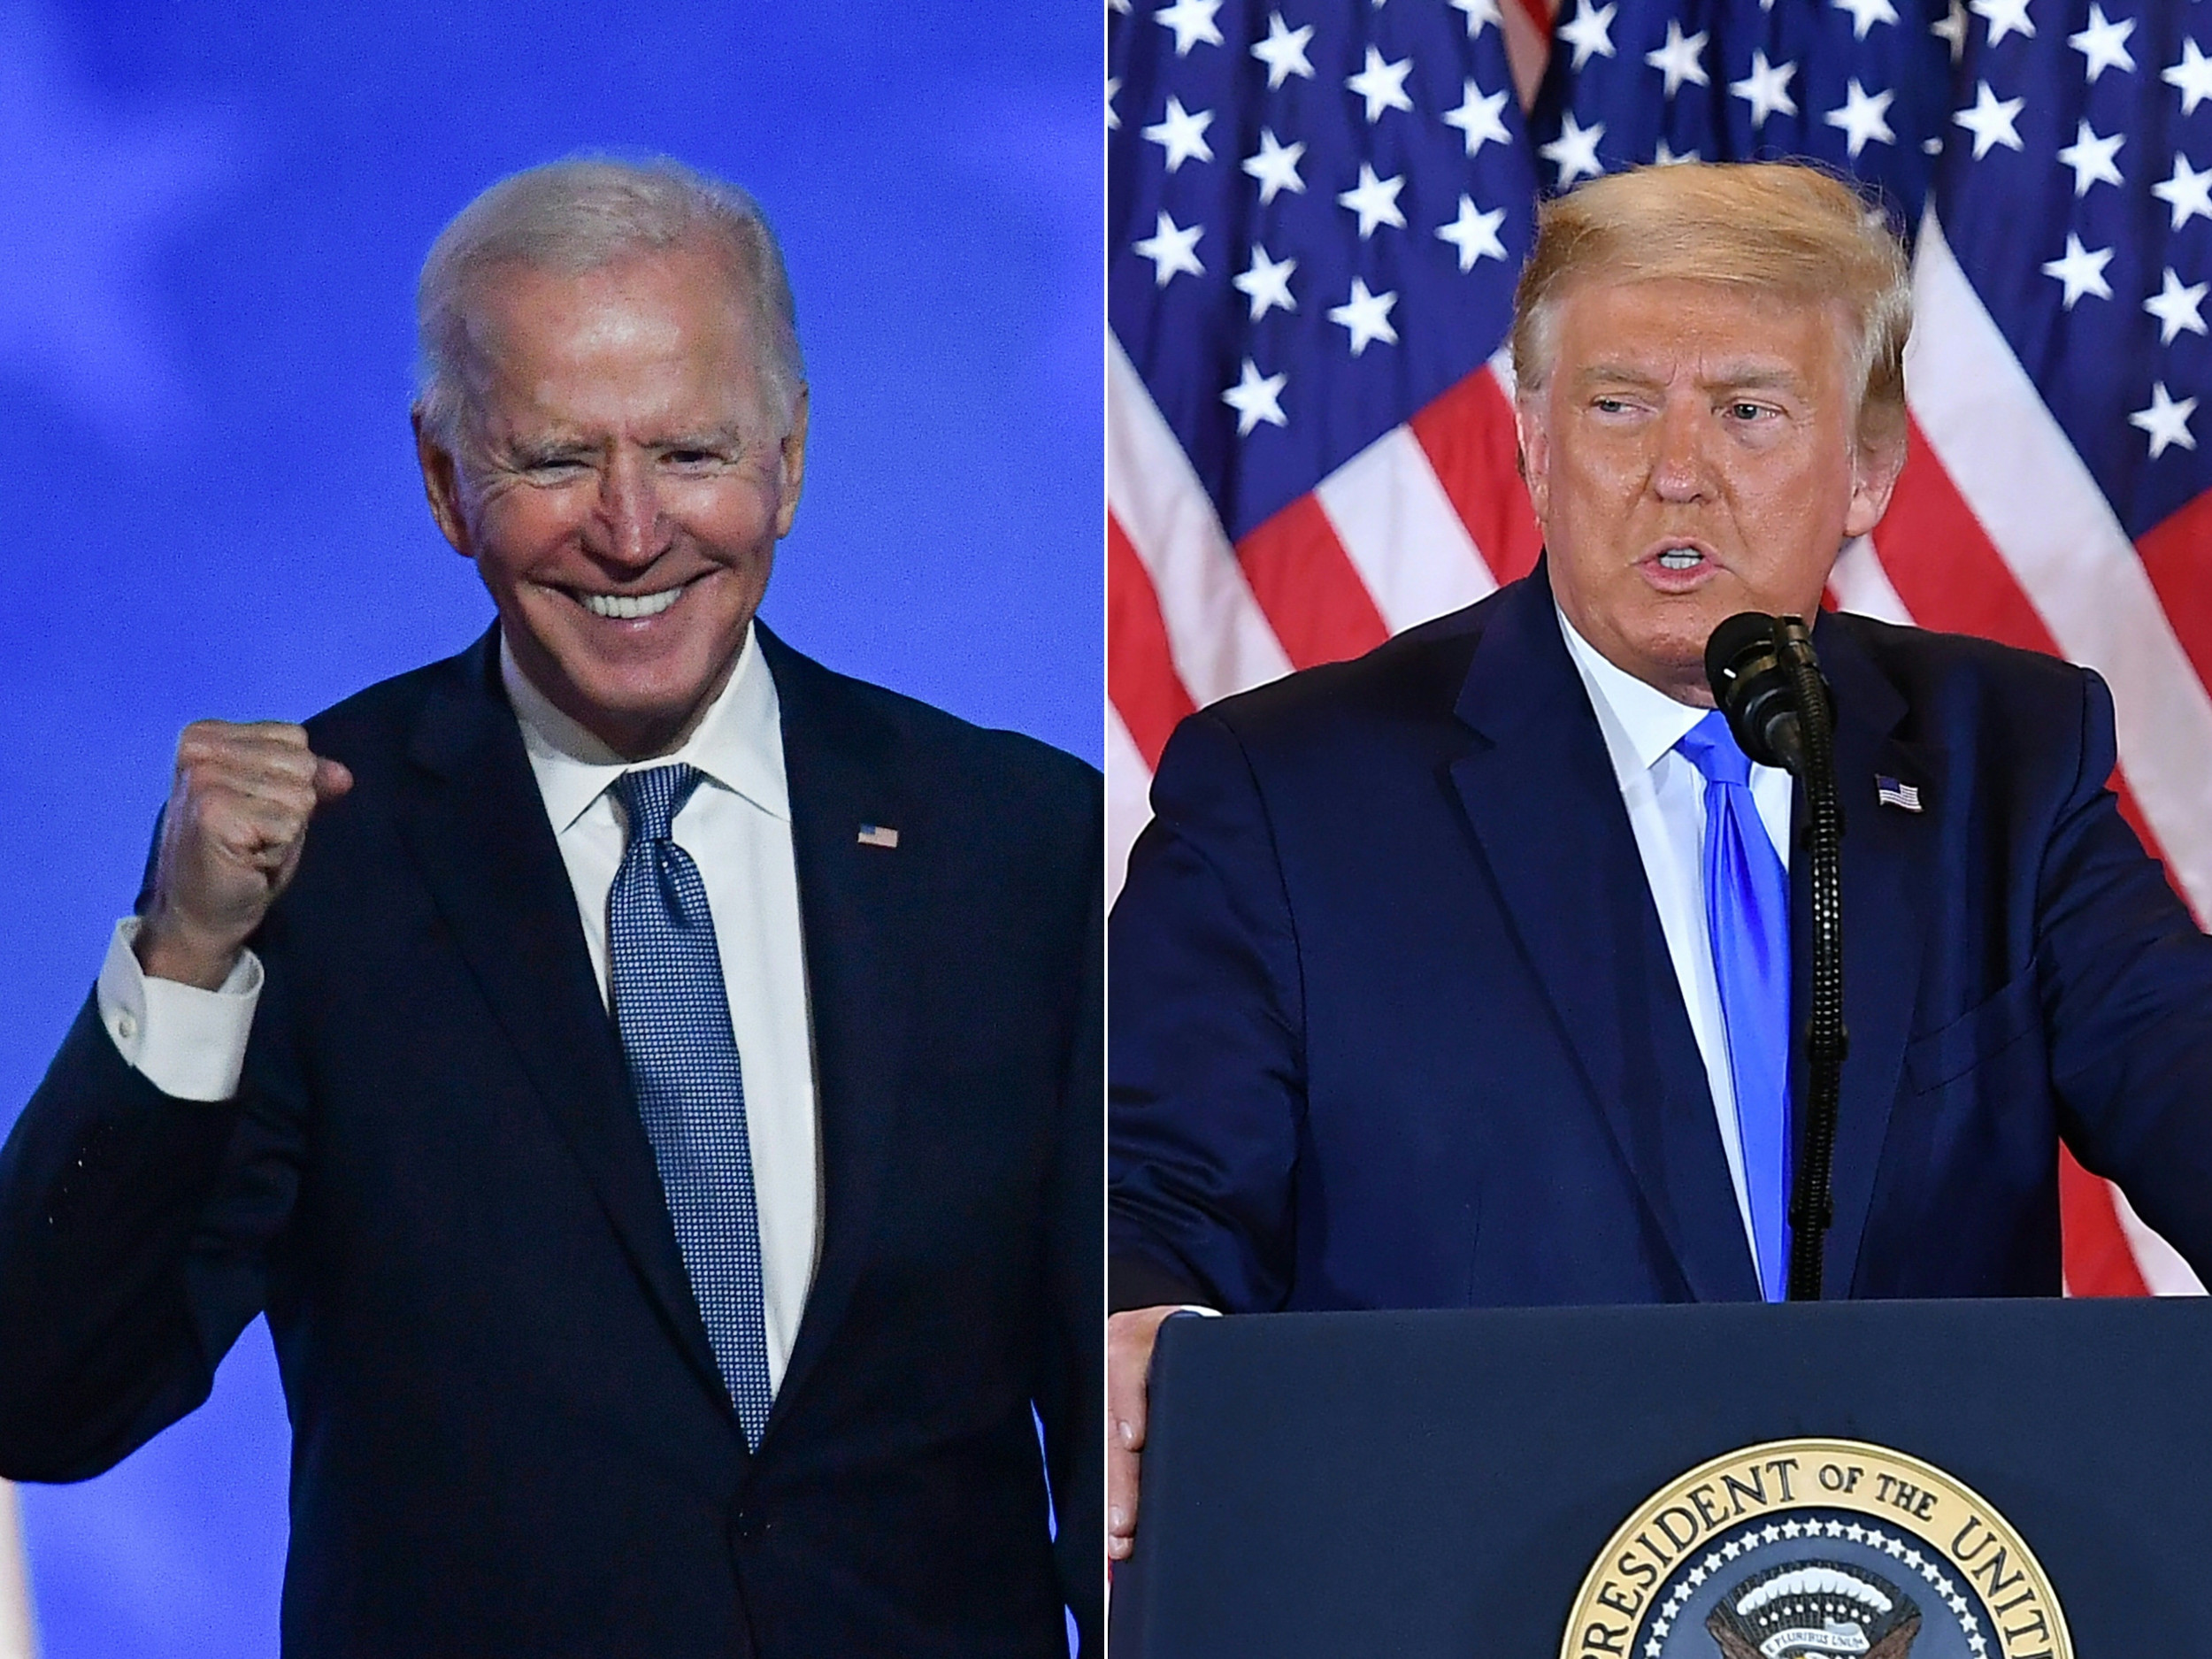 Donald Trump's 4th of July Message Was Very Different From Joe Biden's